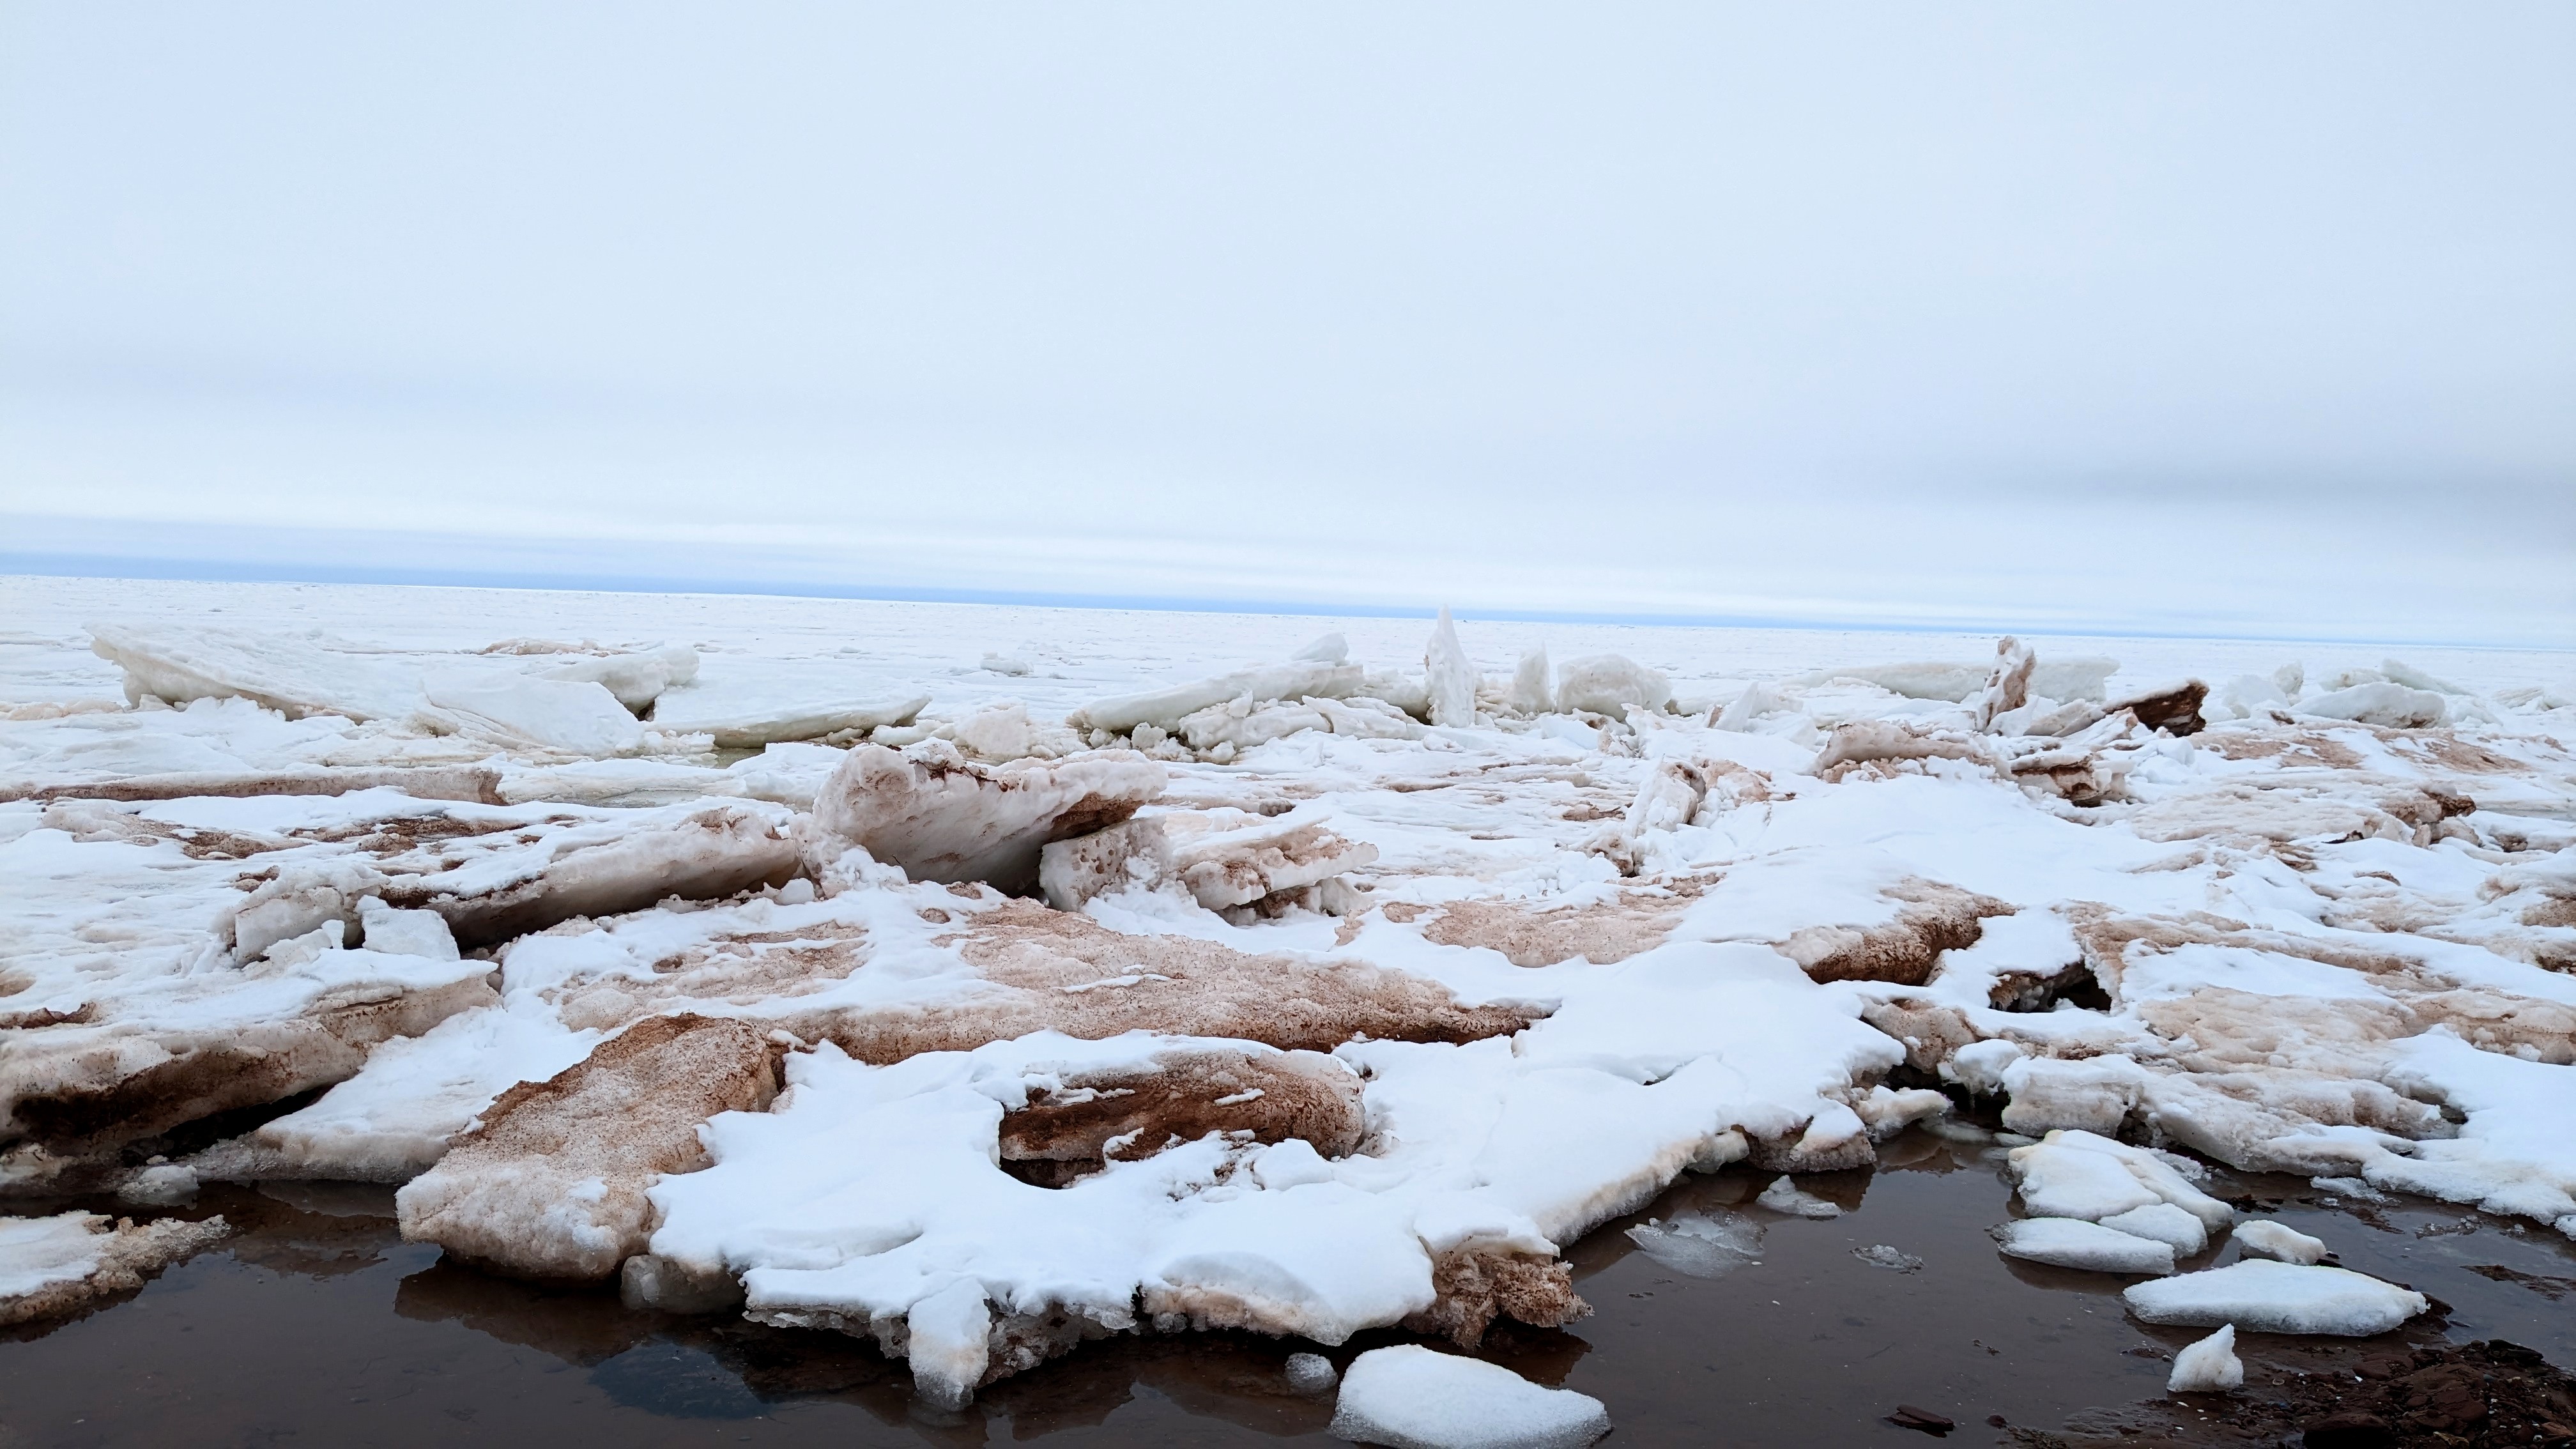 Pink and white ice chunks along the seashore.